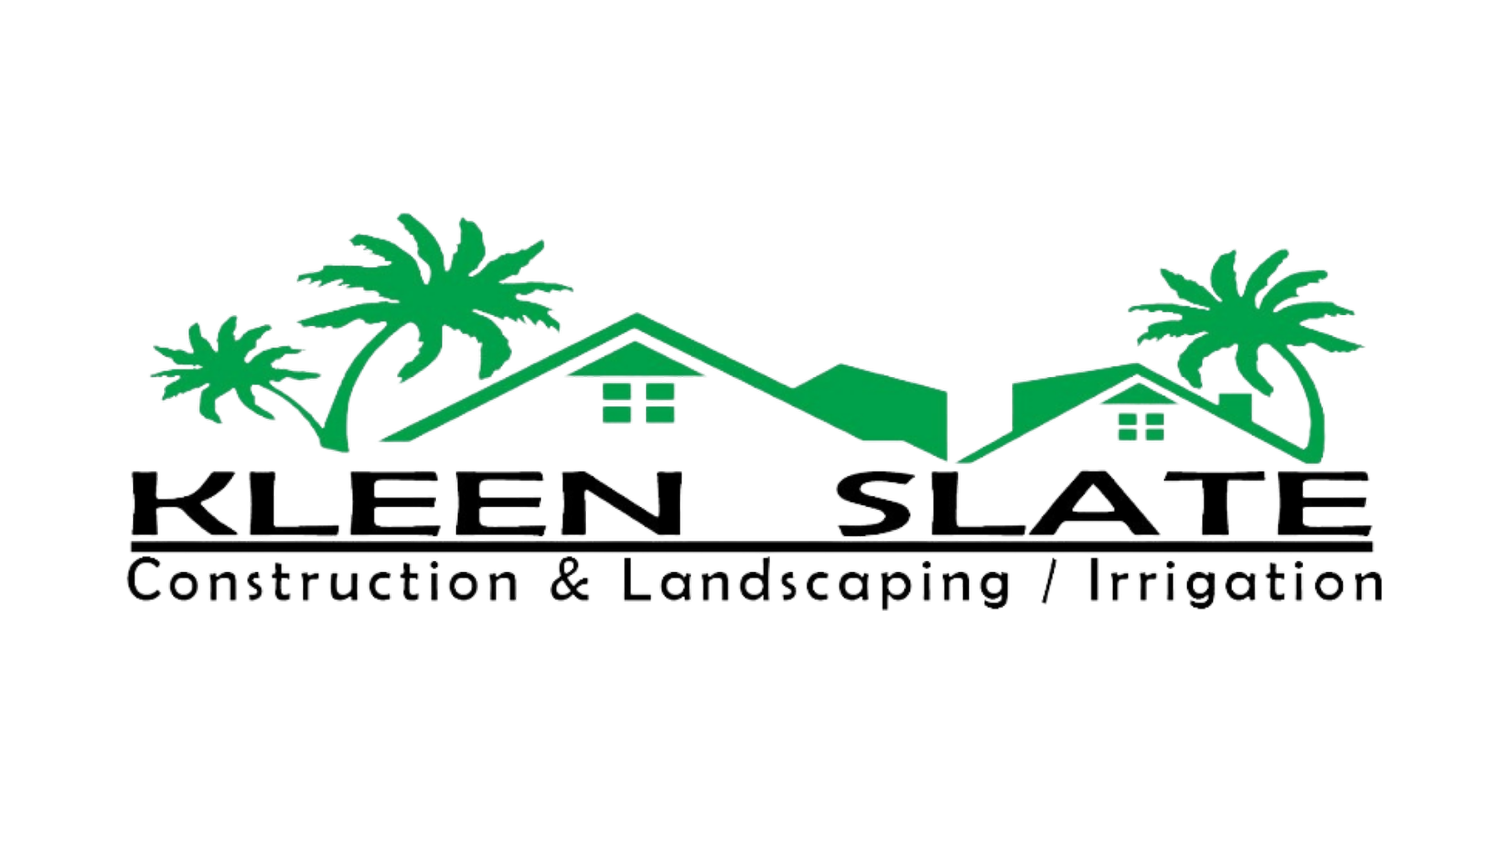 Kleen Slate Construction, Landscaping and Irrigation